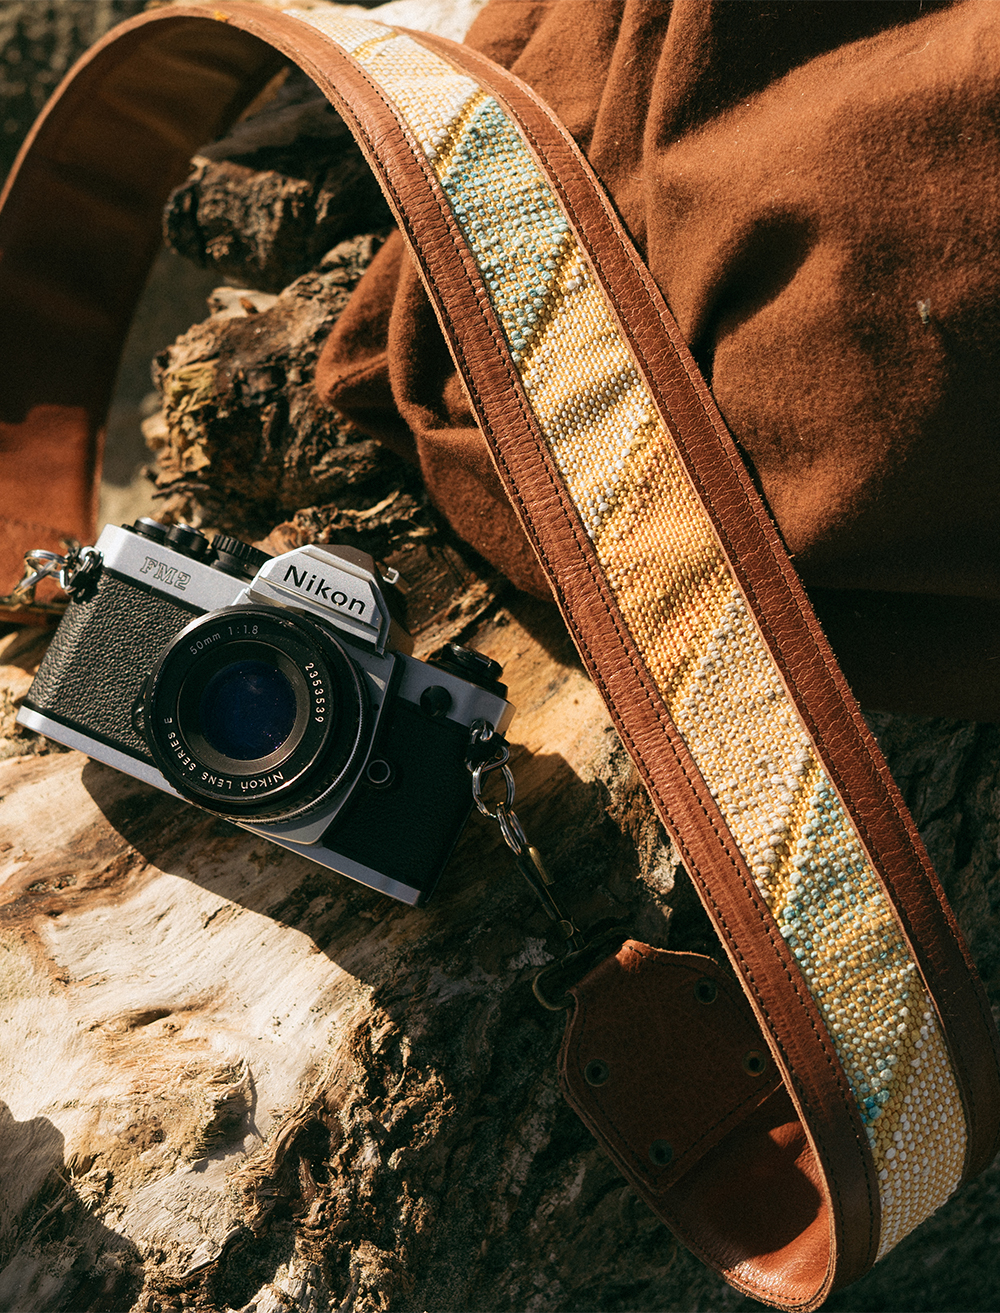 Genuine Leather camera and bags straps - Made in Morocco with cactus silk carpets.